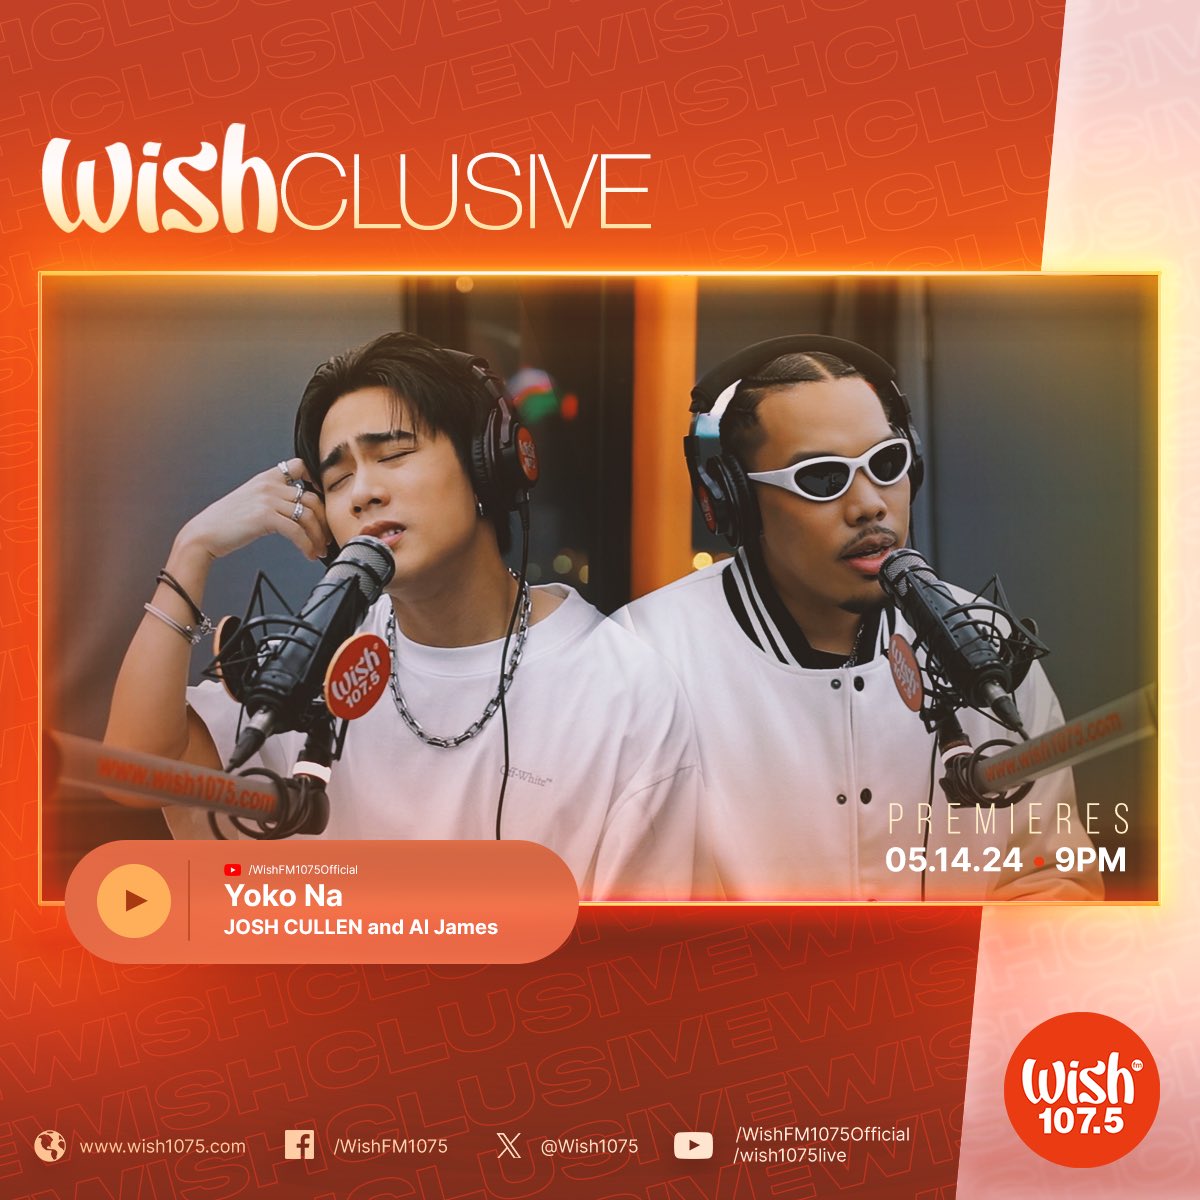 'Yoko Na' conveys the words left untold in a failing relationship. Watch as Josh Cullen and Al James join forces to bring you tonight's Wishclusive!

Their video premieres at 9 PM on our YouTube channel!